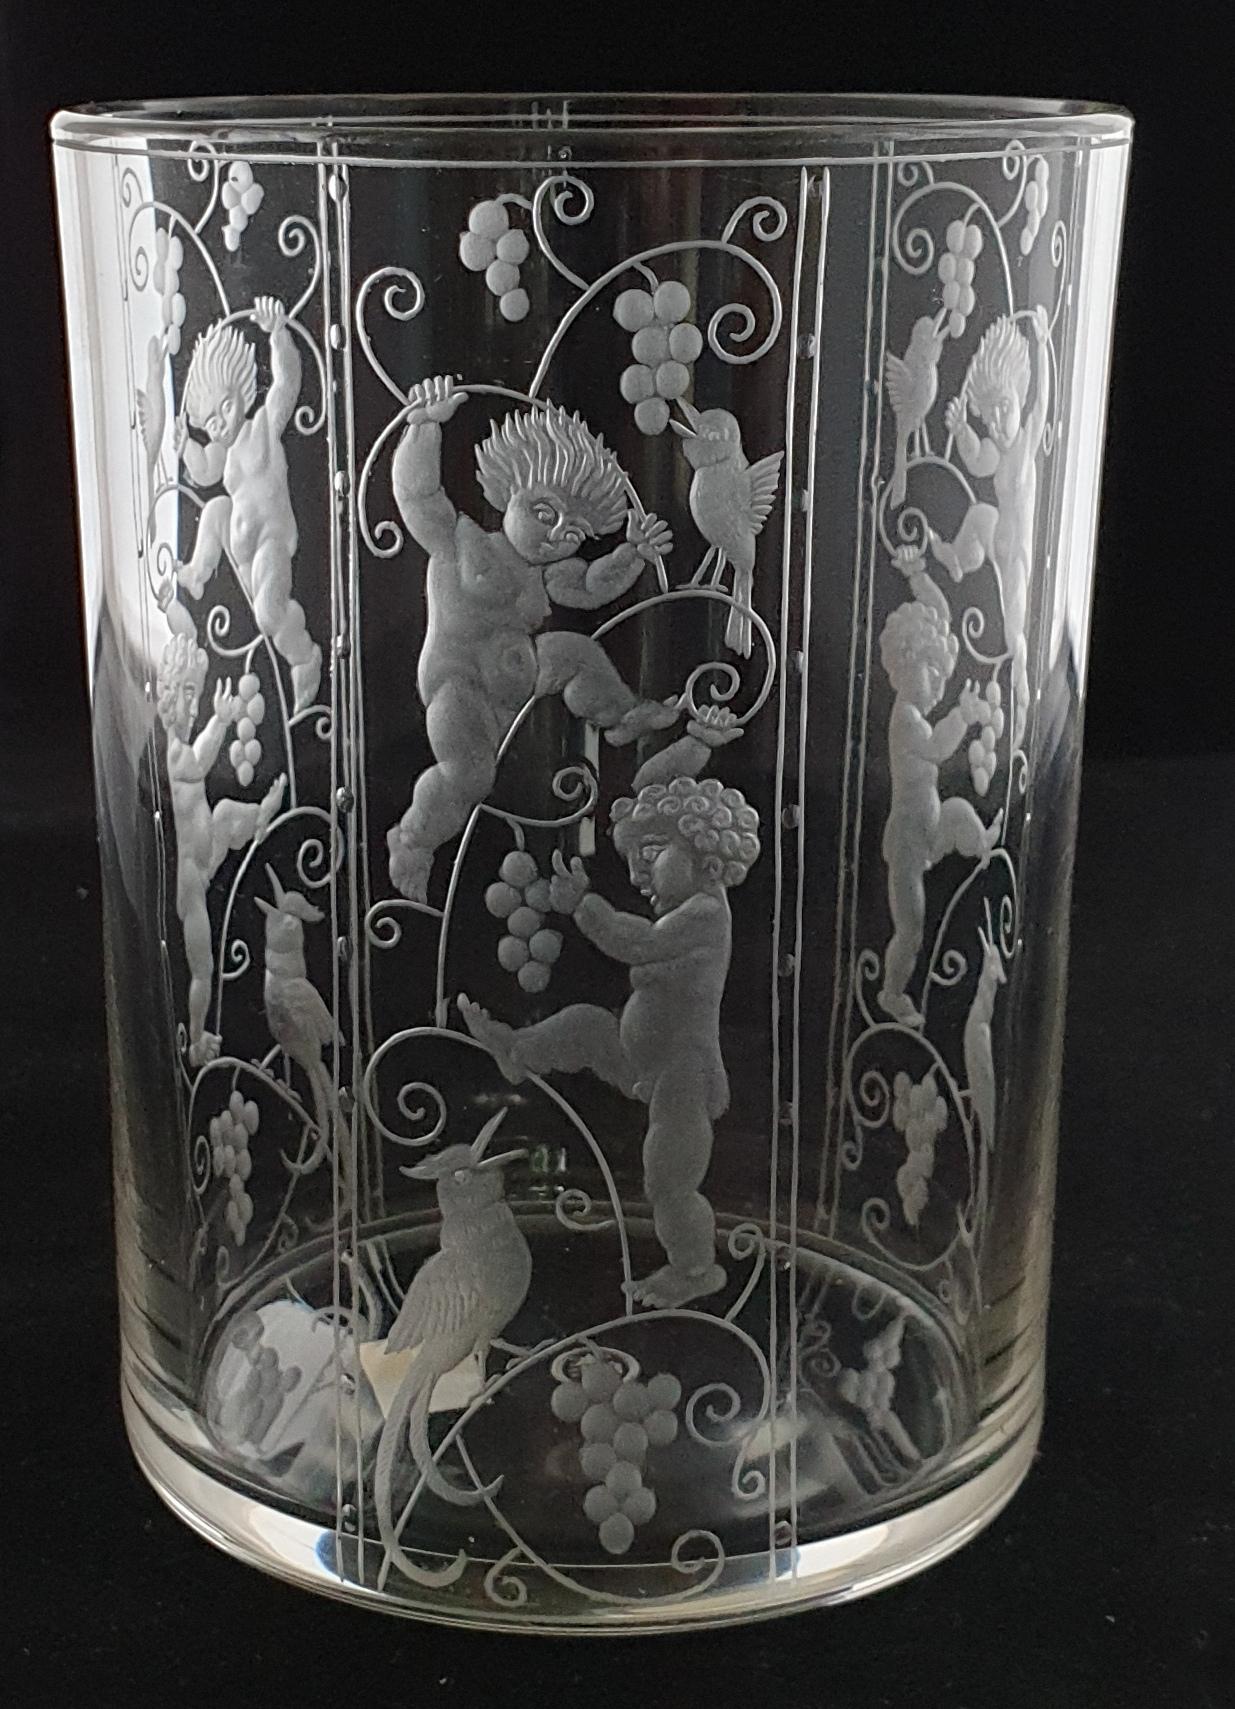 20th Century Art Glass, Designed by Michael Powolny, Engraved by Max Rossler, Lobmeyer C1915